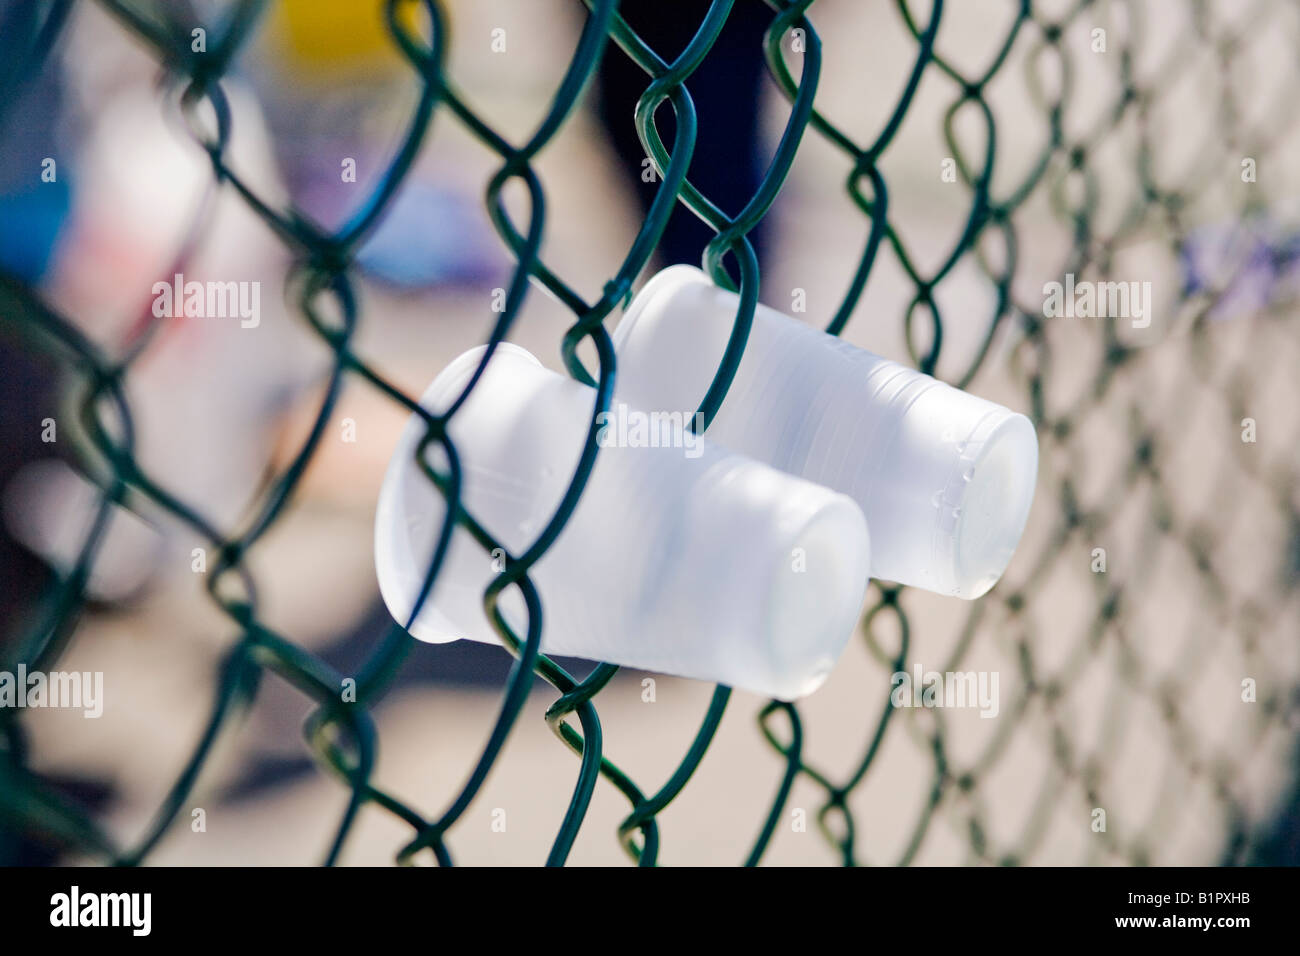 Plastic cups pushed through a green fence Stock Photo